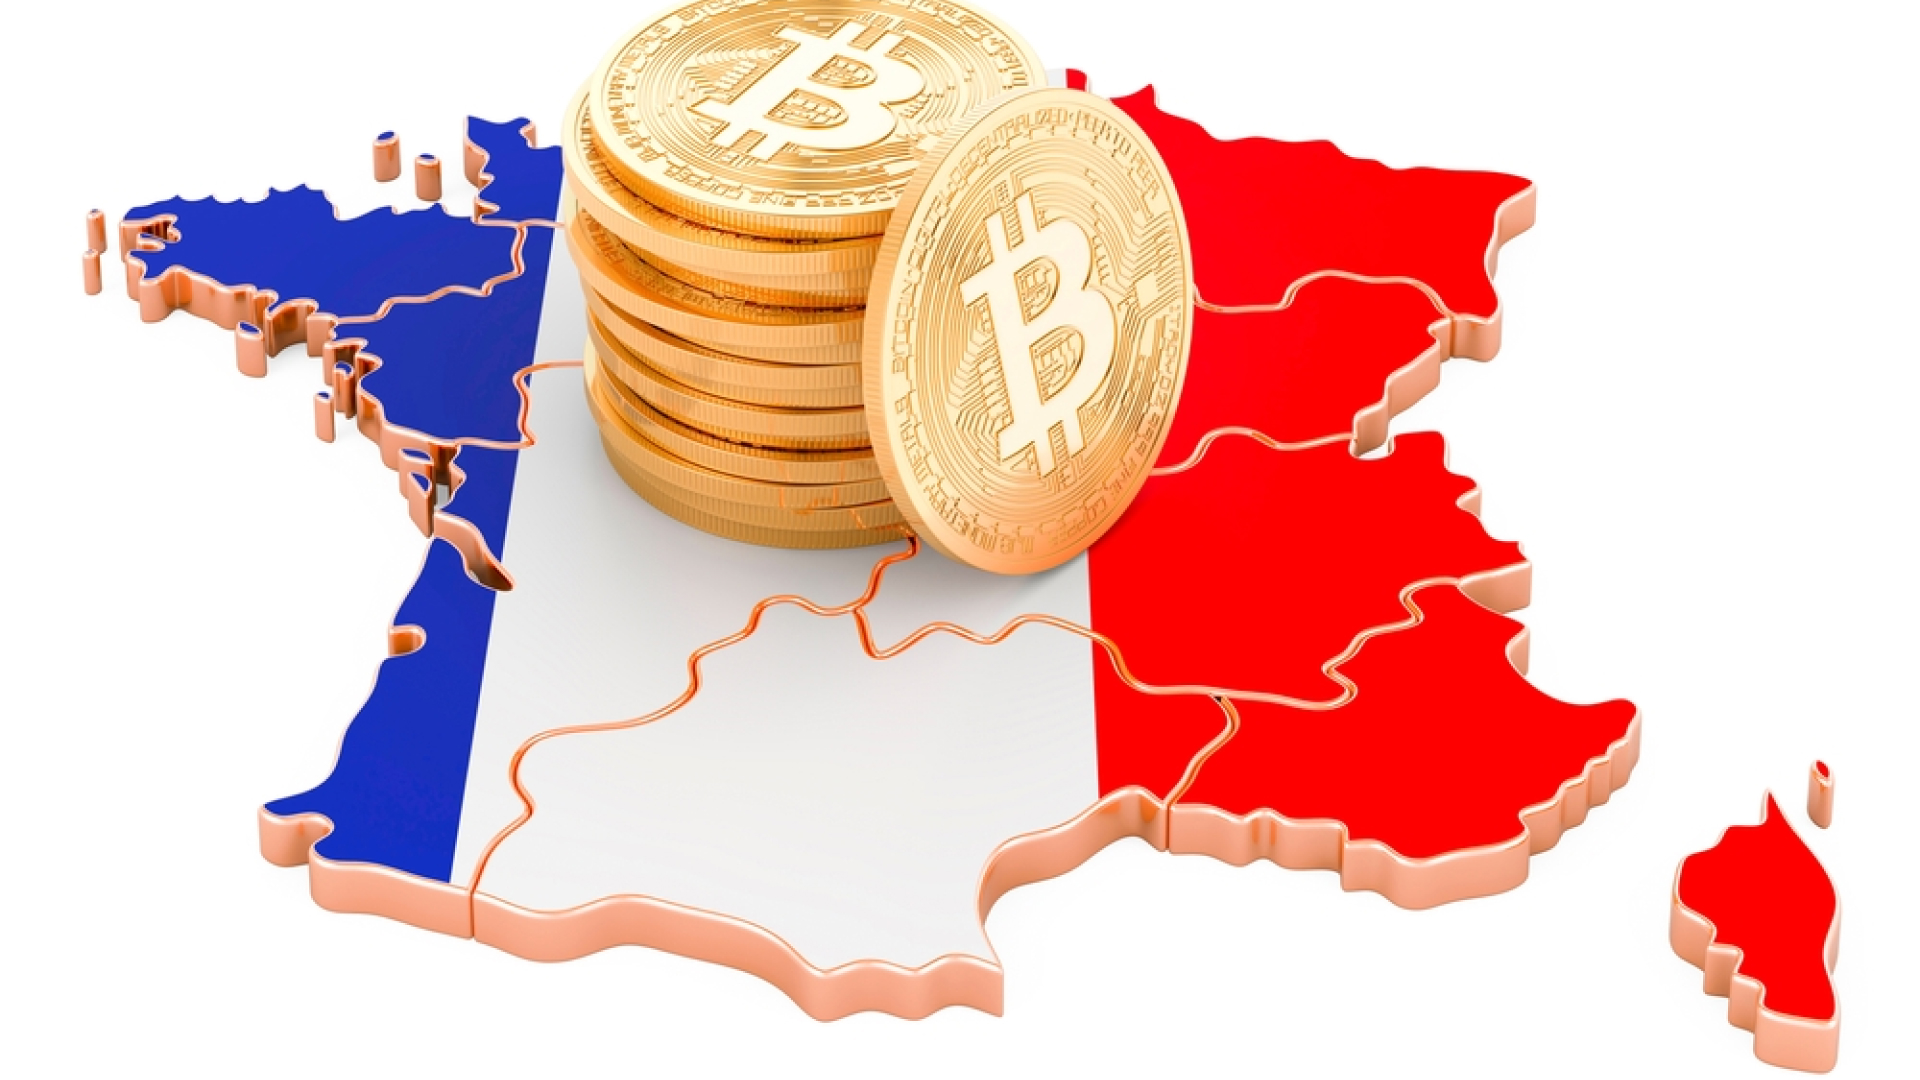 Head of French Central Bank Pushes for Crypto Licensing